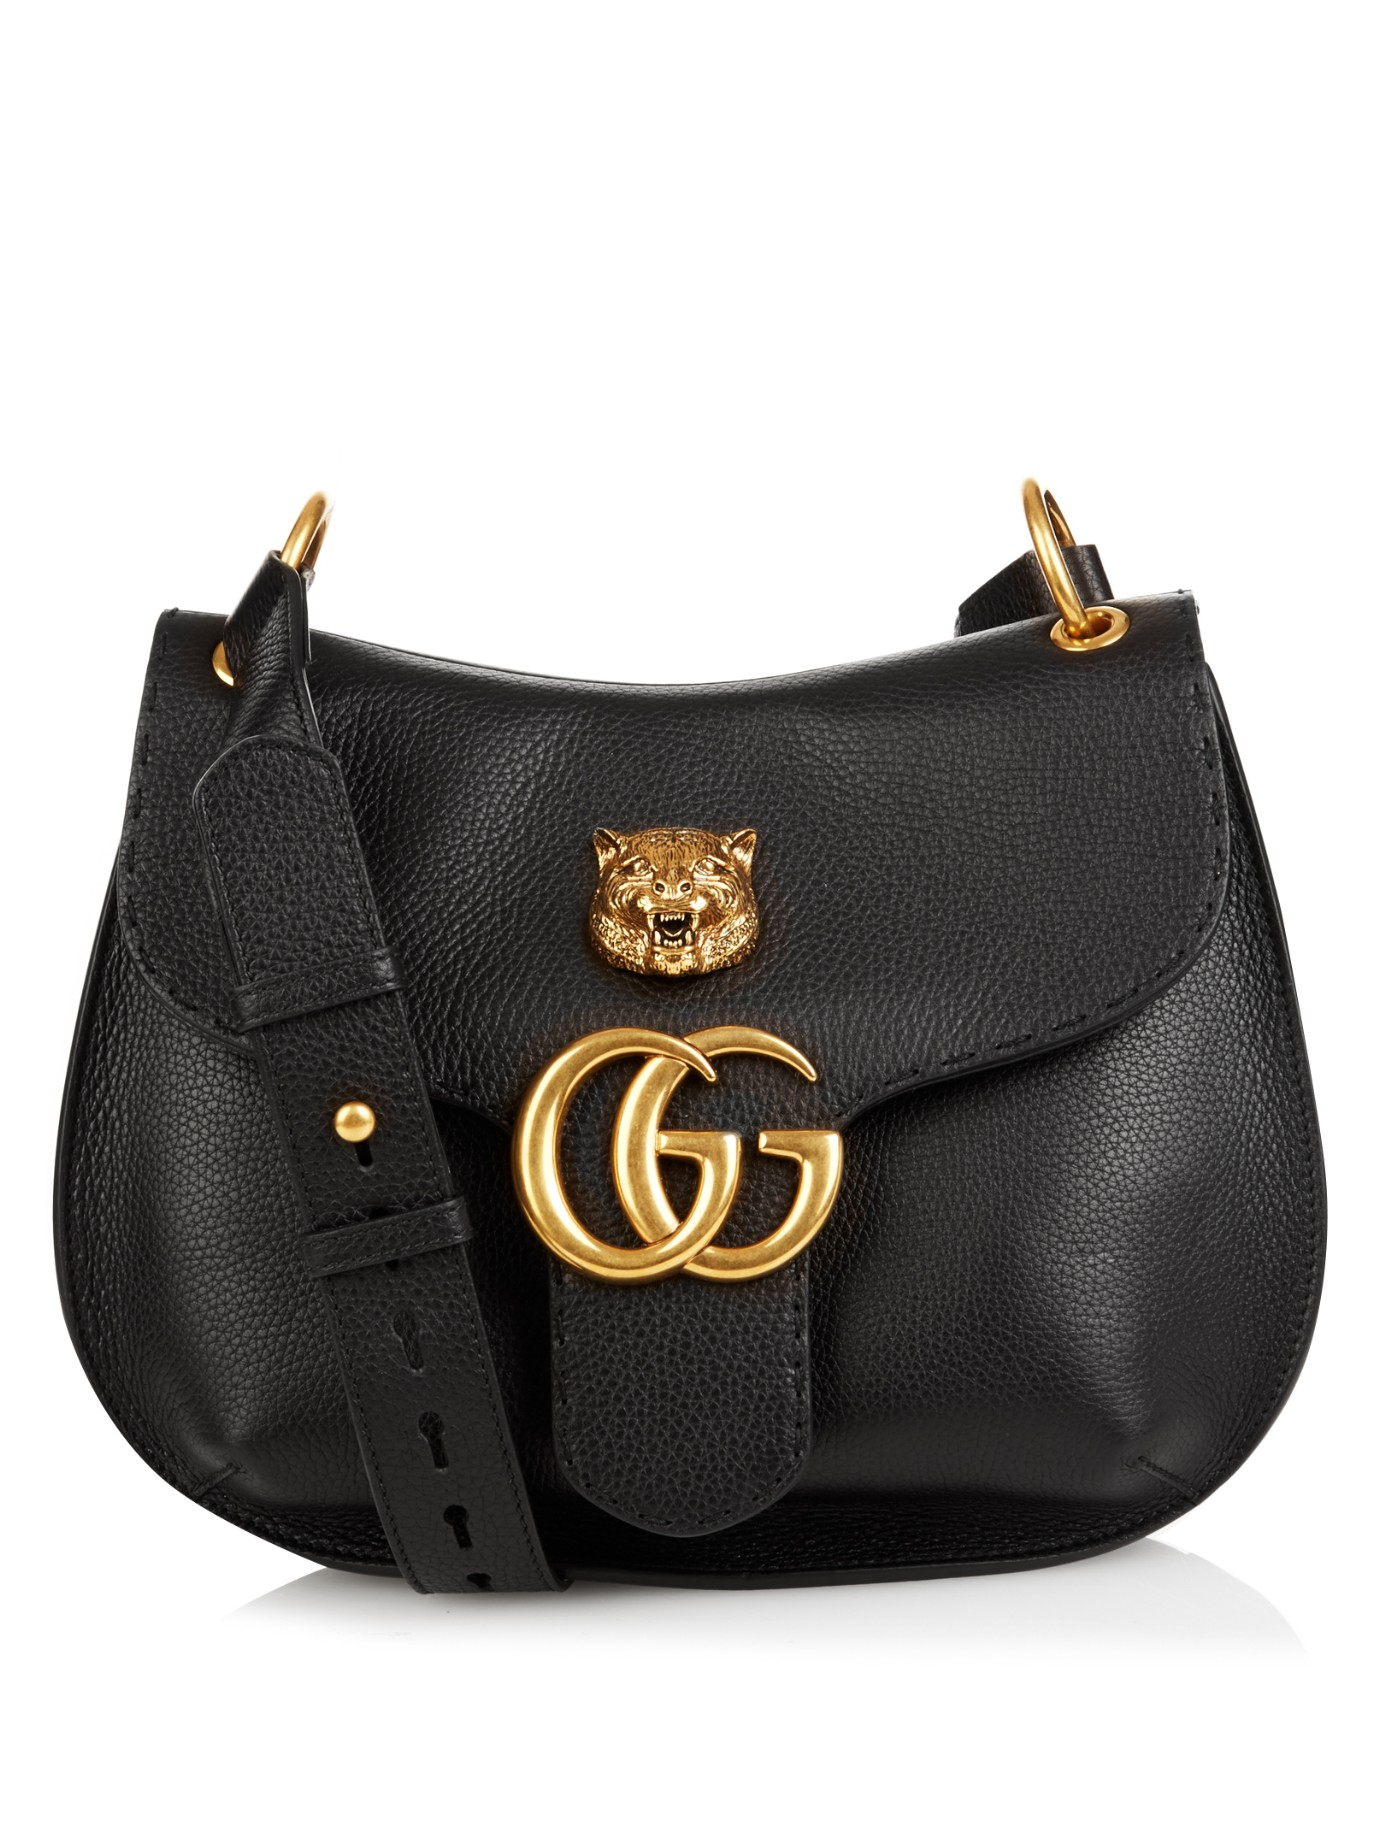 Gucci GG Marmont Leather Shoulder Bag in Black Leather (Black) - Lyst